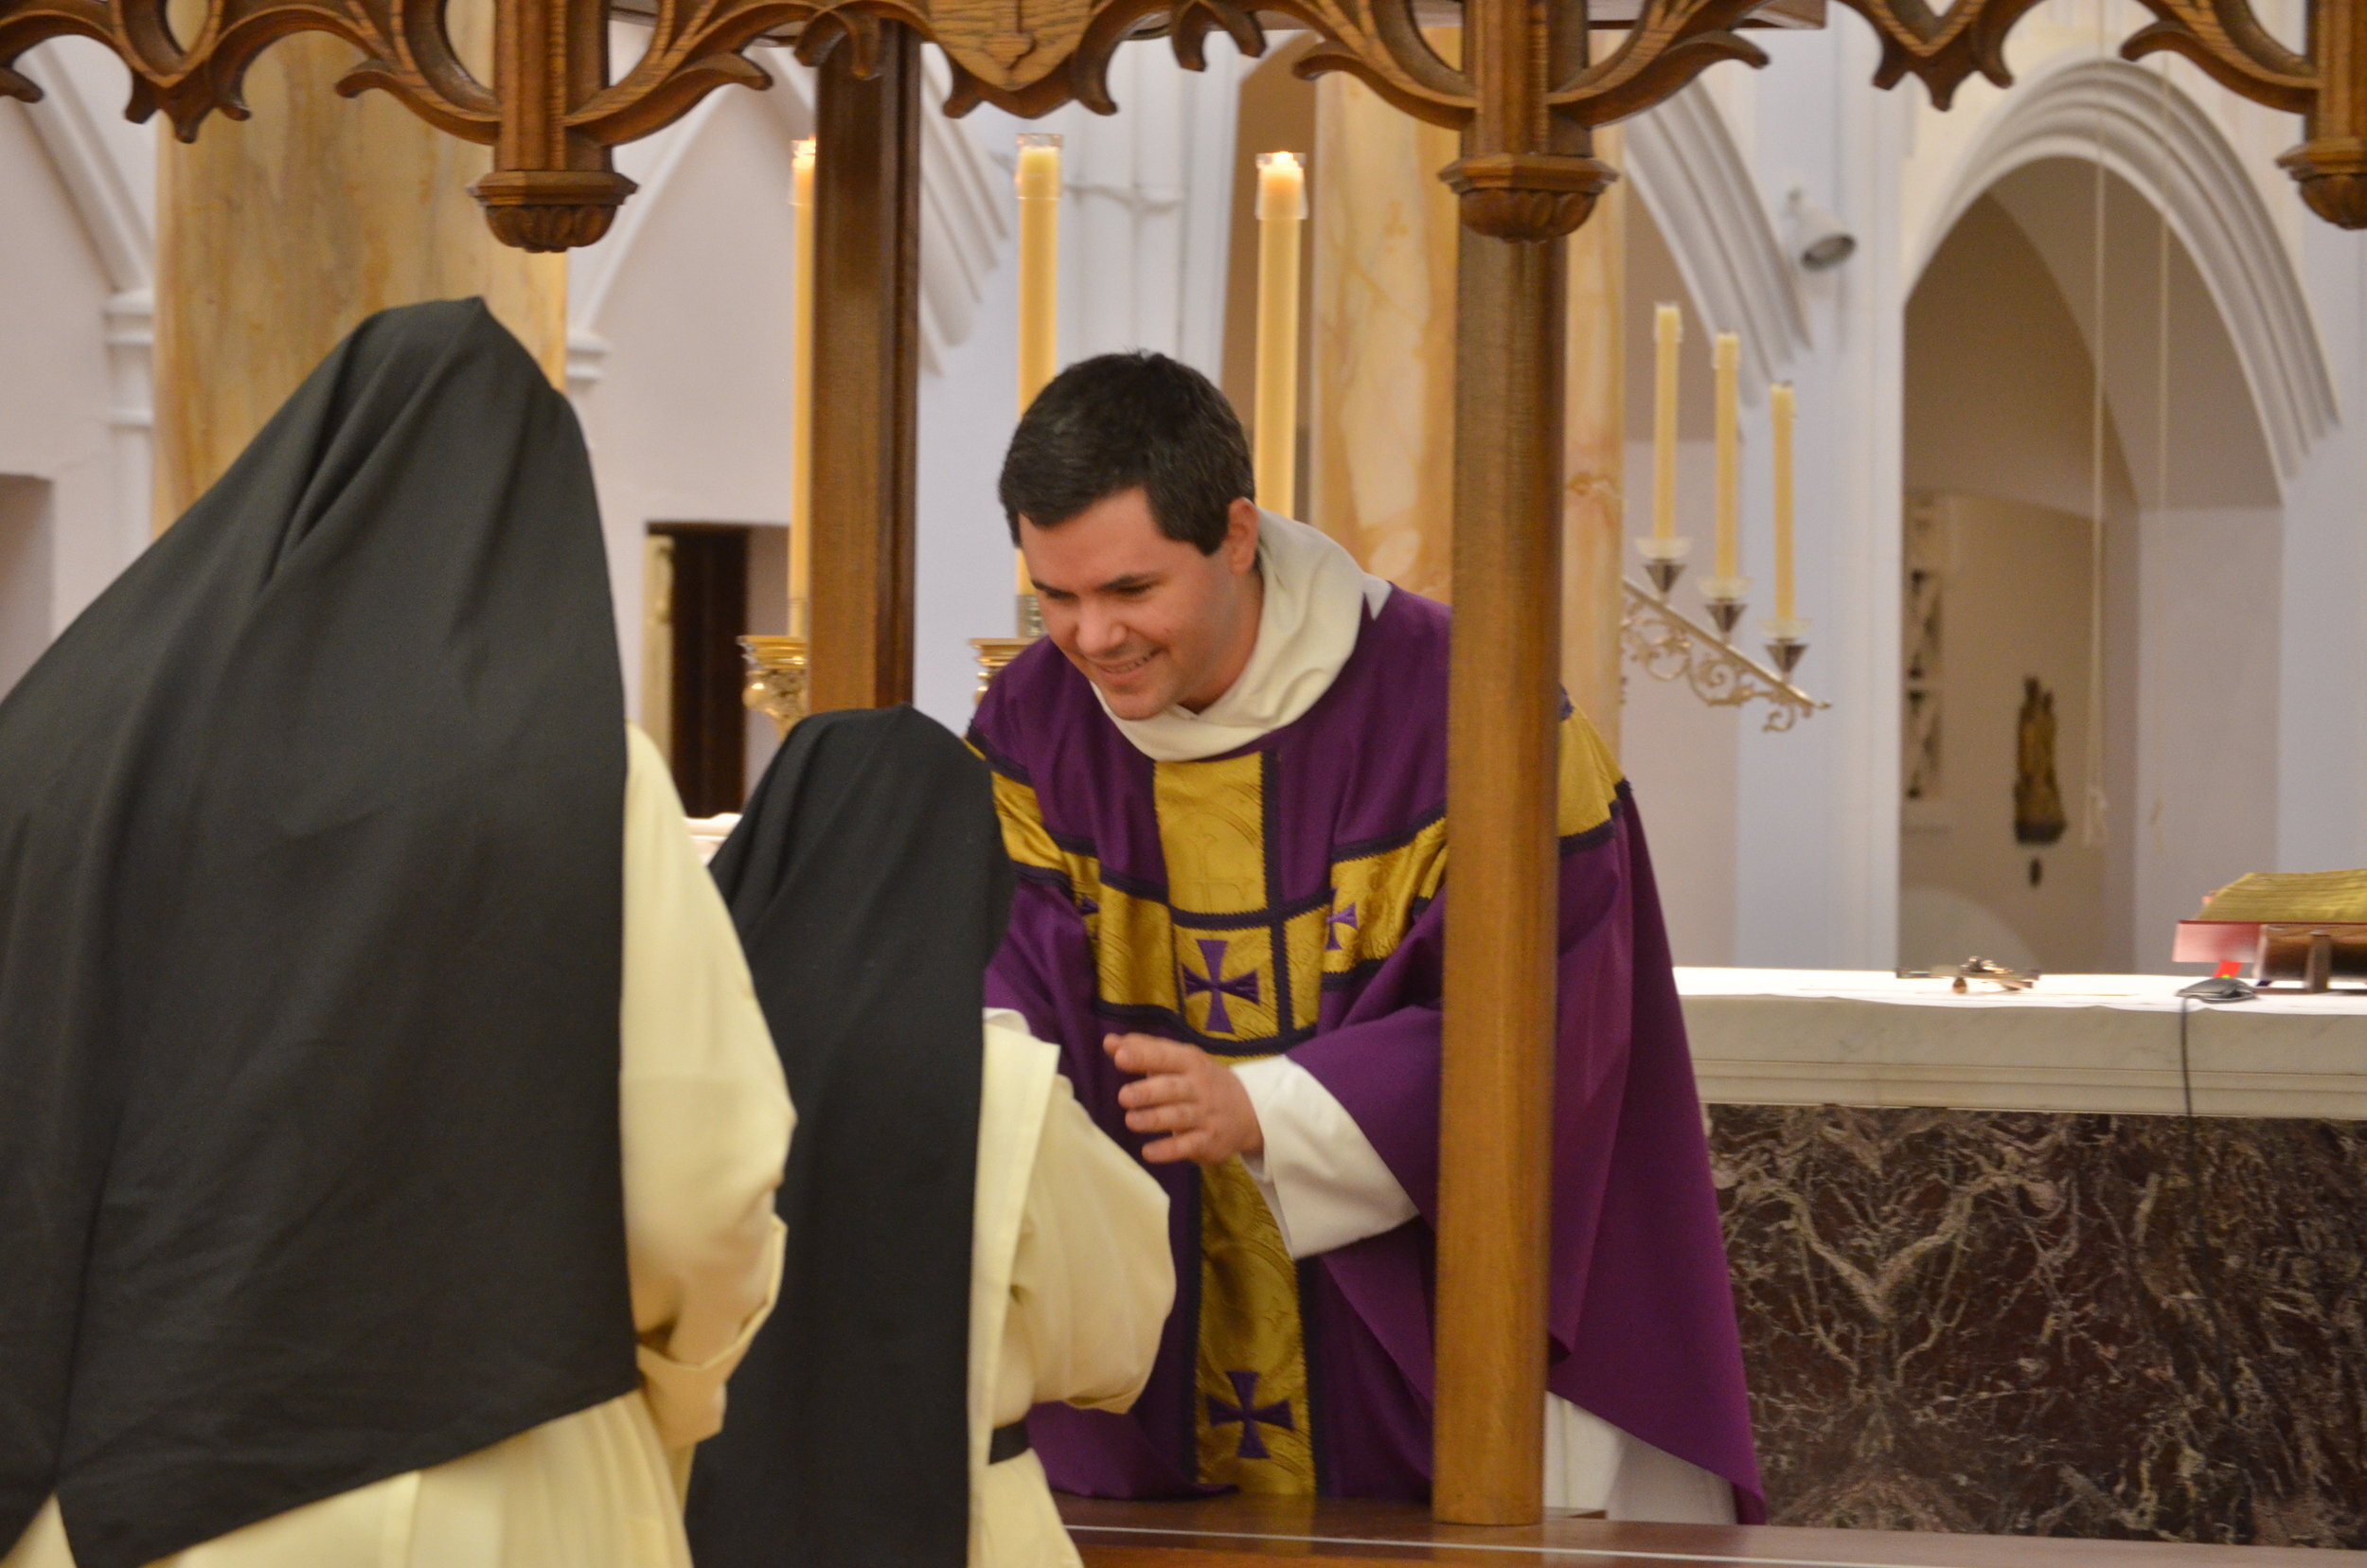 Fr. Patrick gives his "first" blessing to Sr. Maria Agnes